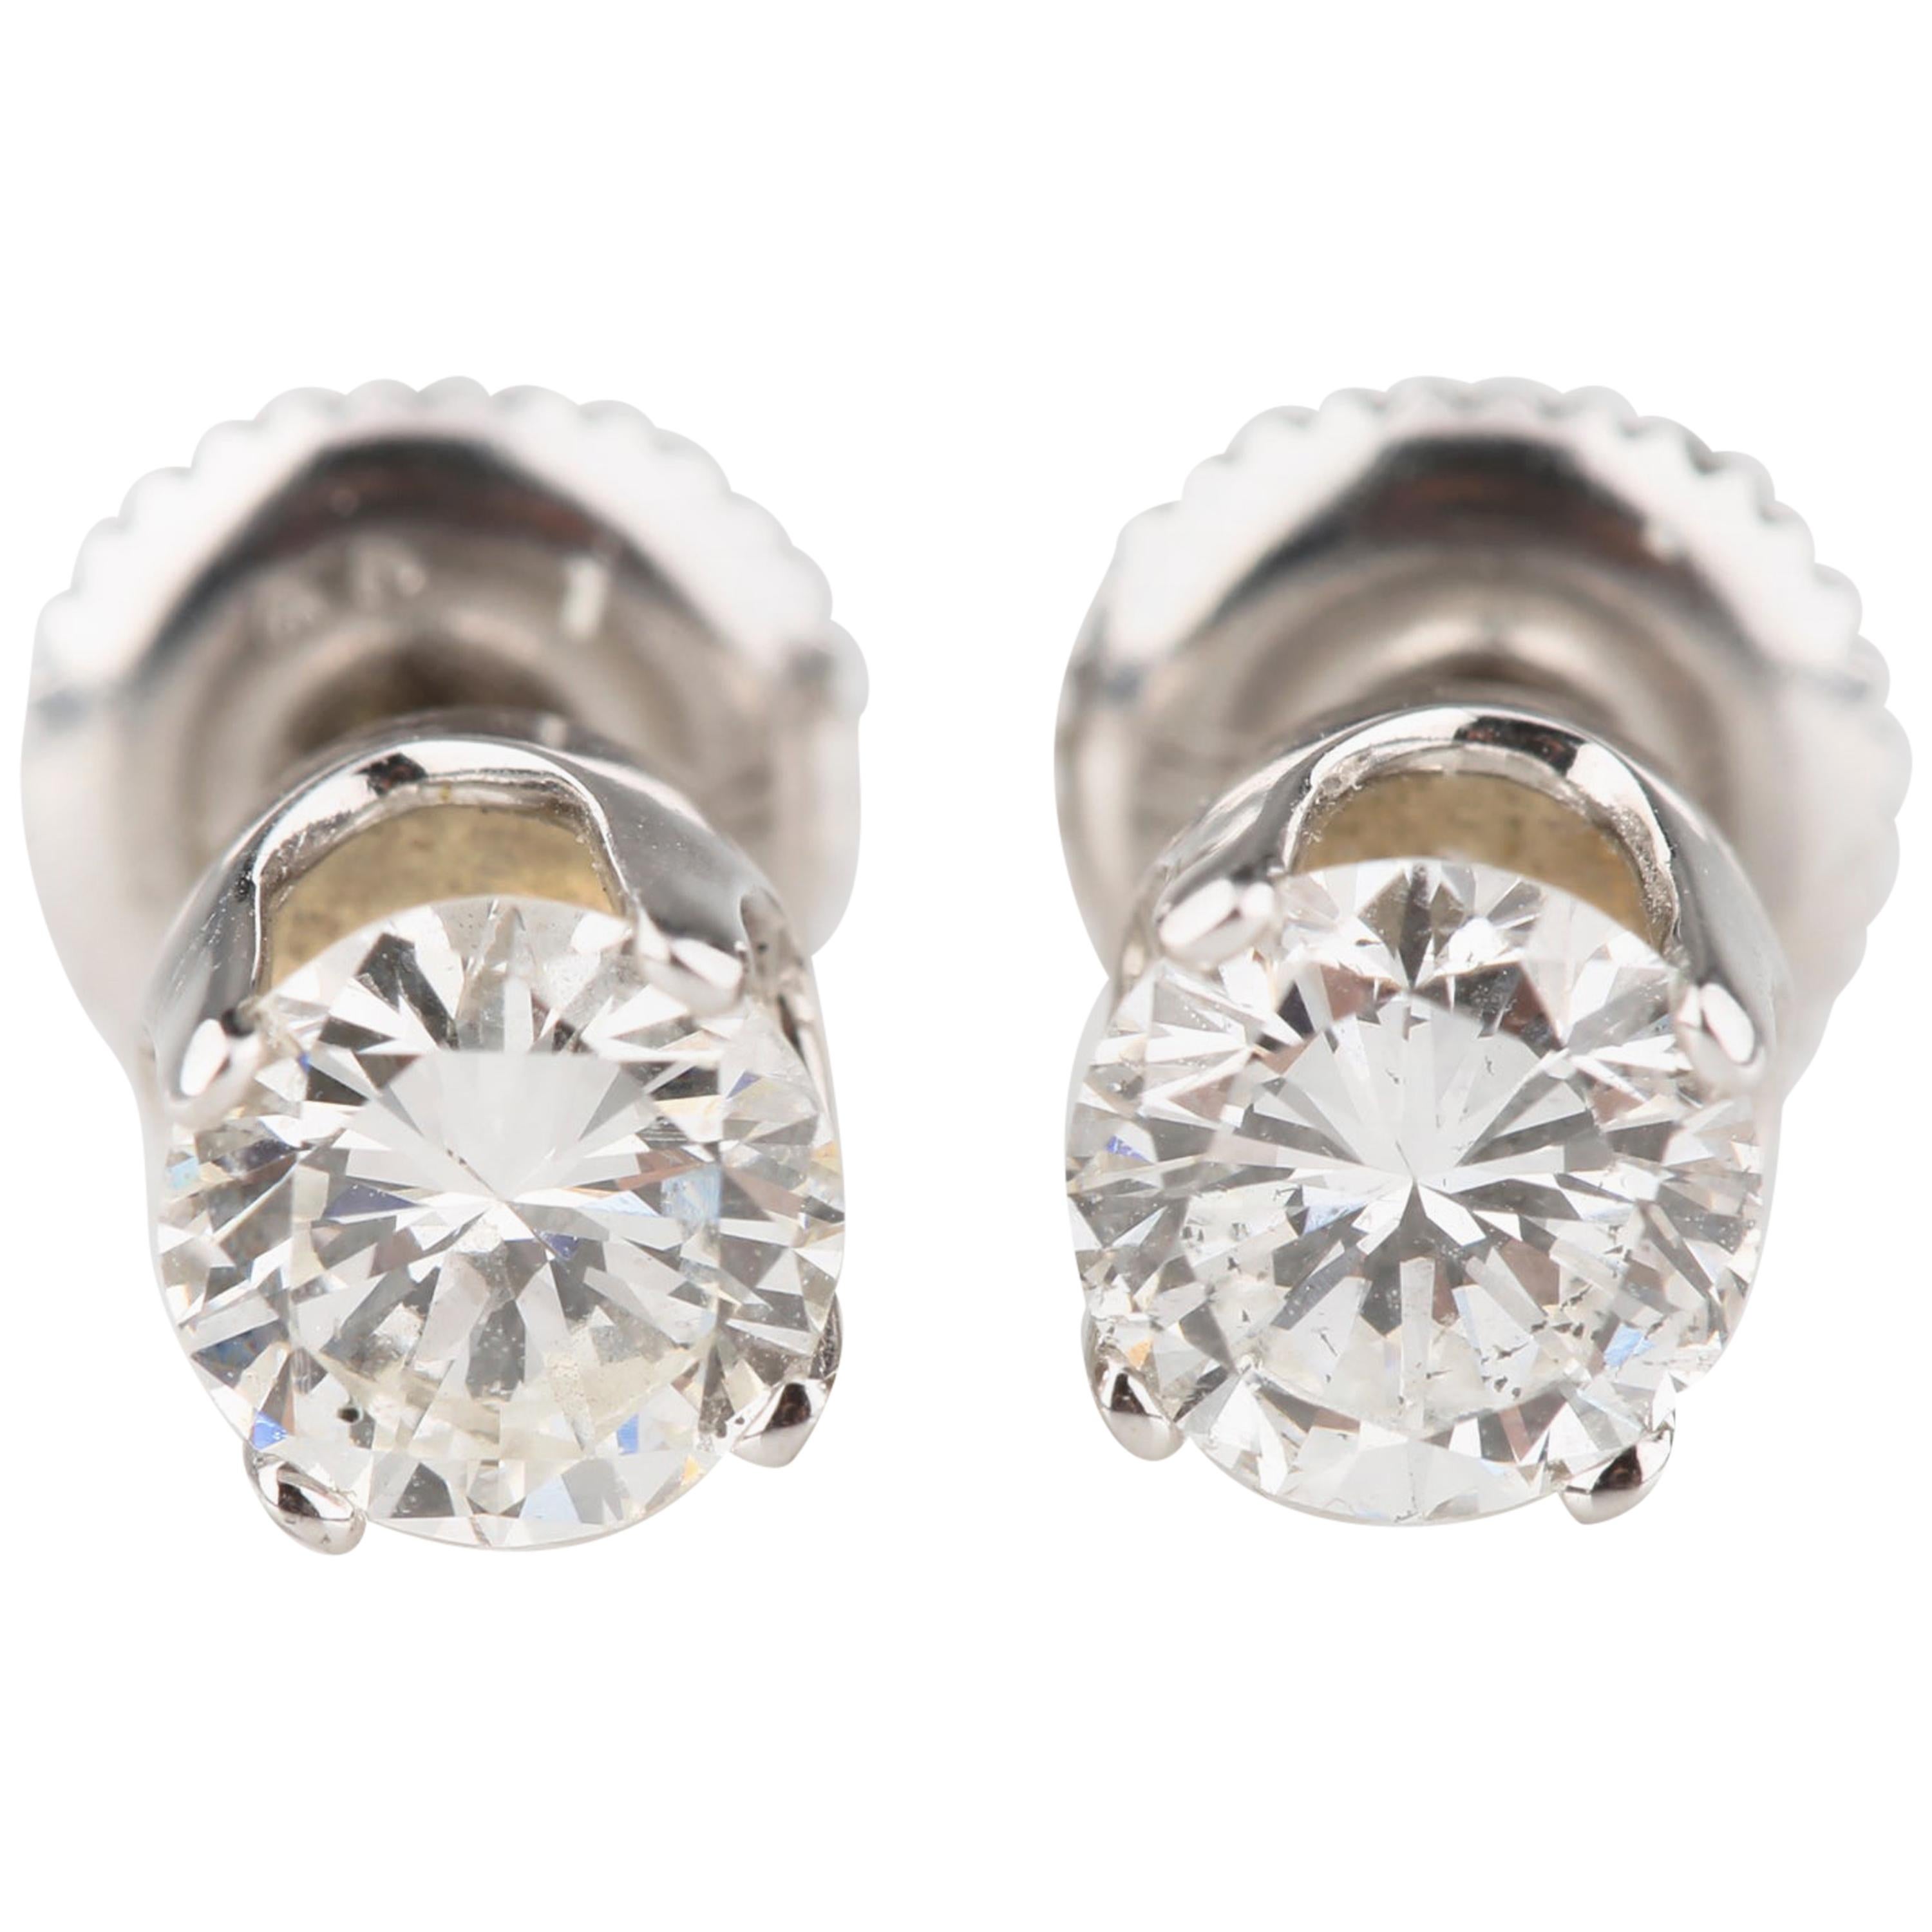 0.94 Carat Round Diamond Solitaire Stud Eararings in White Gold G SI1